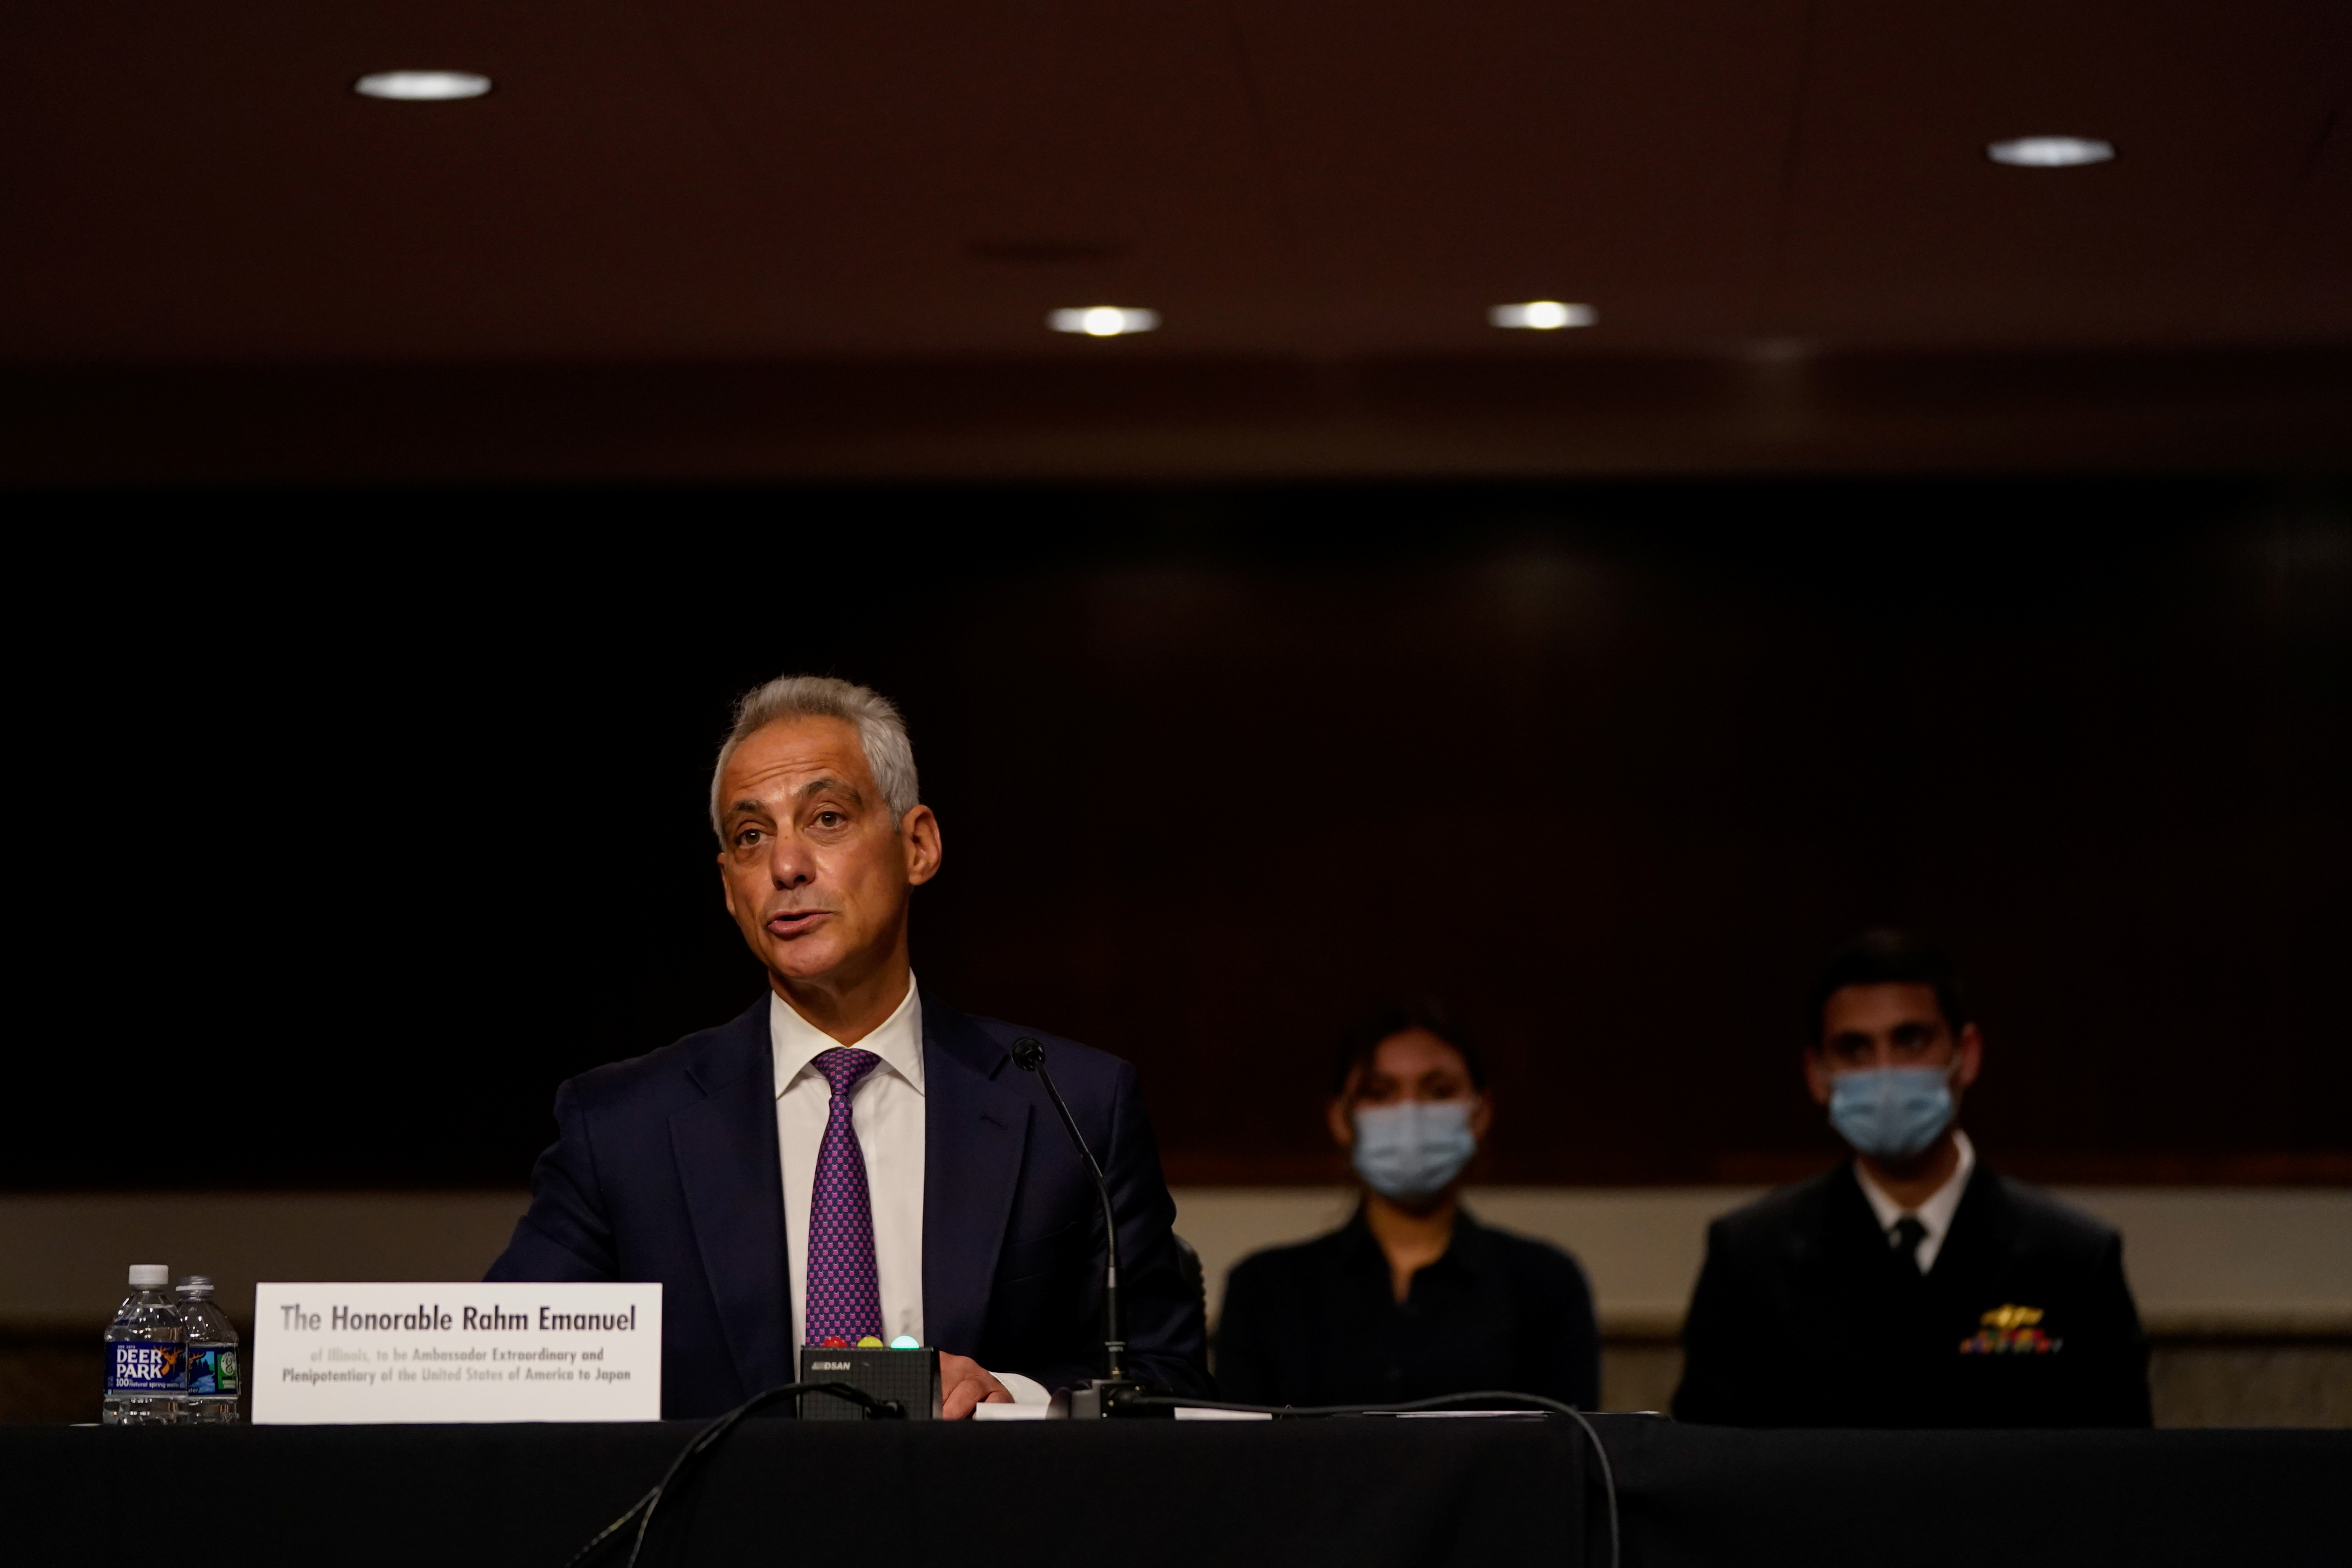 Former Chicago Mayor Rahm Emanuel gives his opening statement during the Senate Foreign Relations Committee hearing on his nomination to be the United States Ambassador to Japan, on Capitol Hill in Washington, U.S., October 20, 2021. REUTERS/Elizabeth Frantz